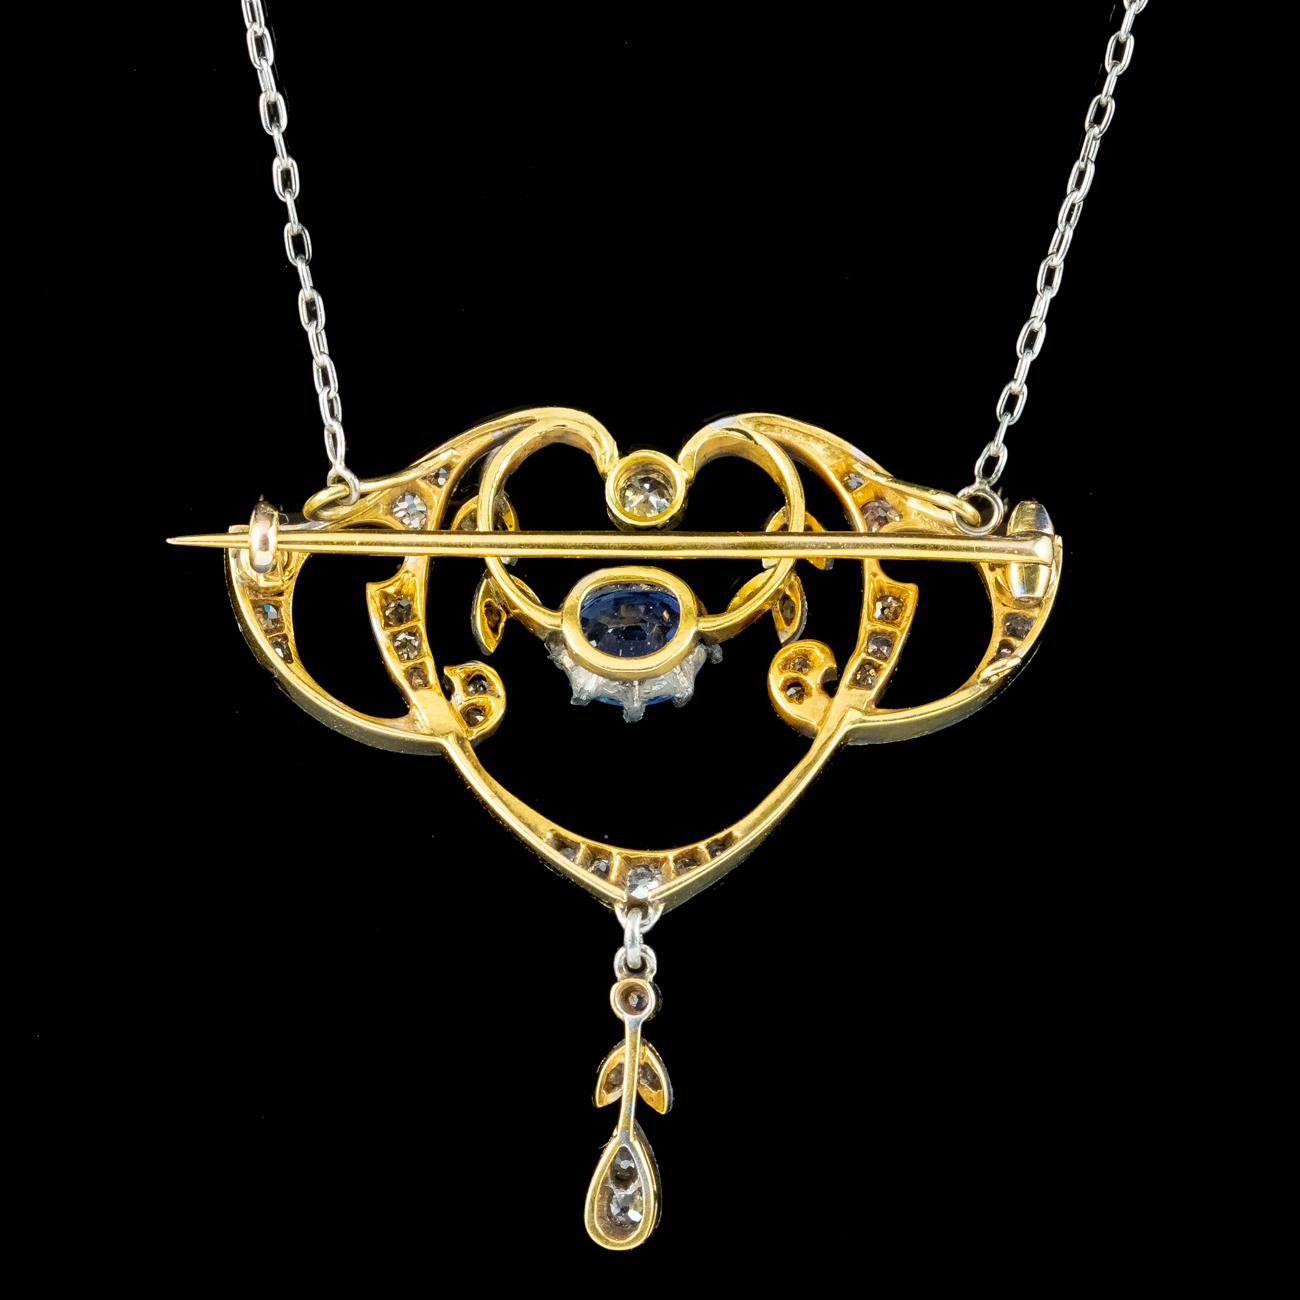 Antique Edwardian Ceylon Sapphire Diamond Lavaliere Pendant Necklace With Cert In Good Condition For Sale In Kendal, GB